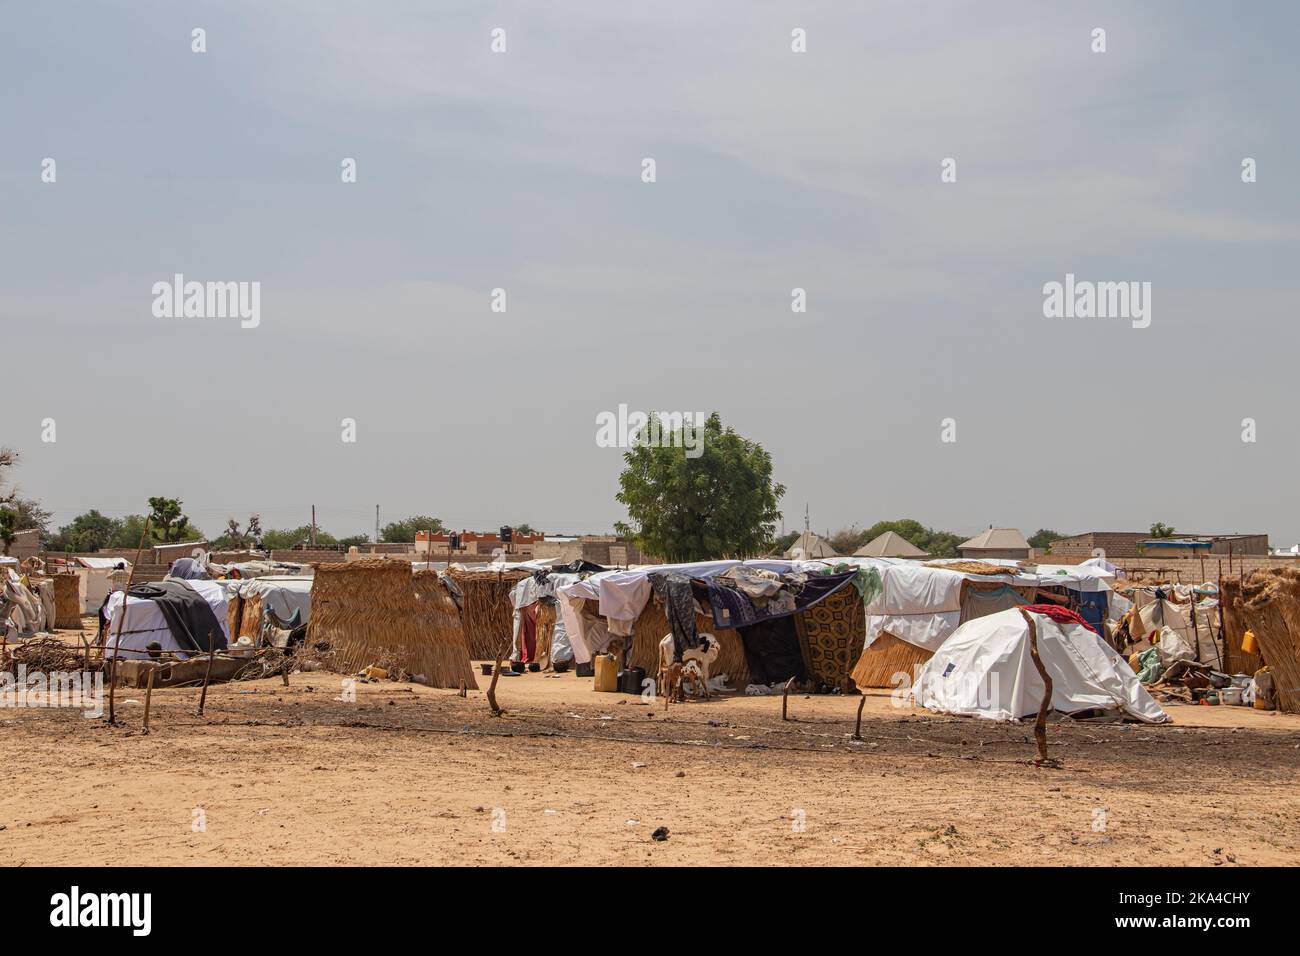 Refugee camp in Africa, full of people who took refuge due to insecurity and armed conflict. People living in very poor conditions Stock Photo